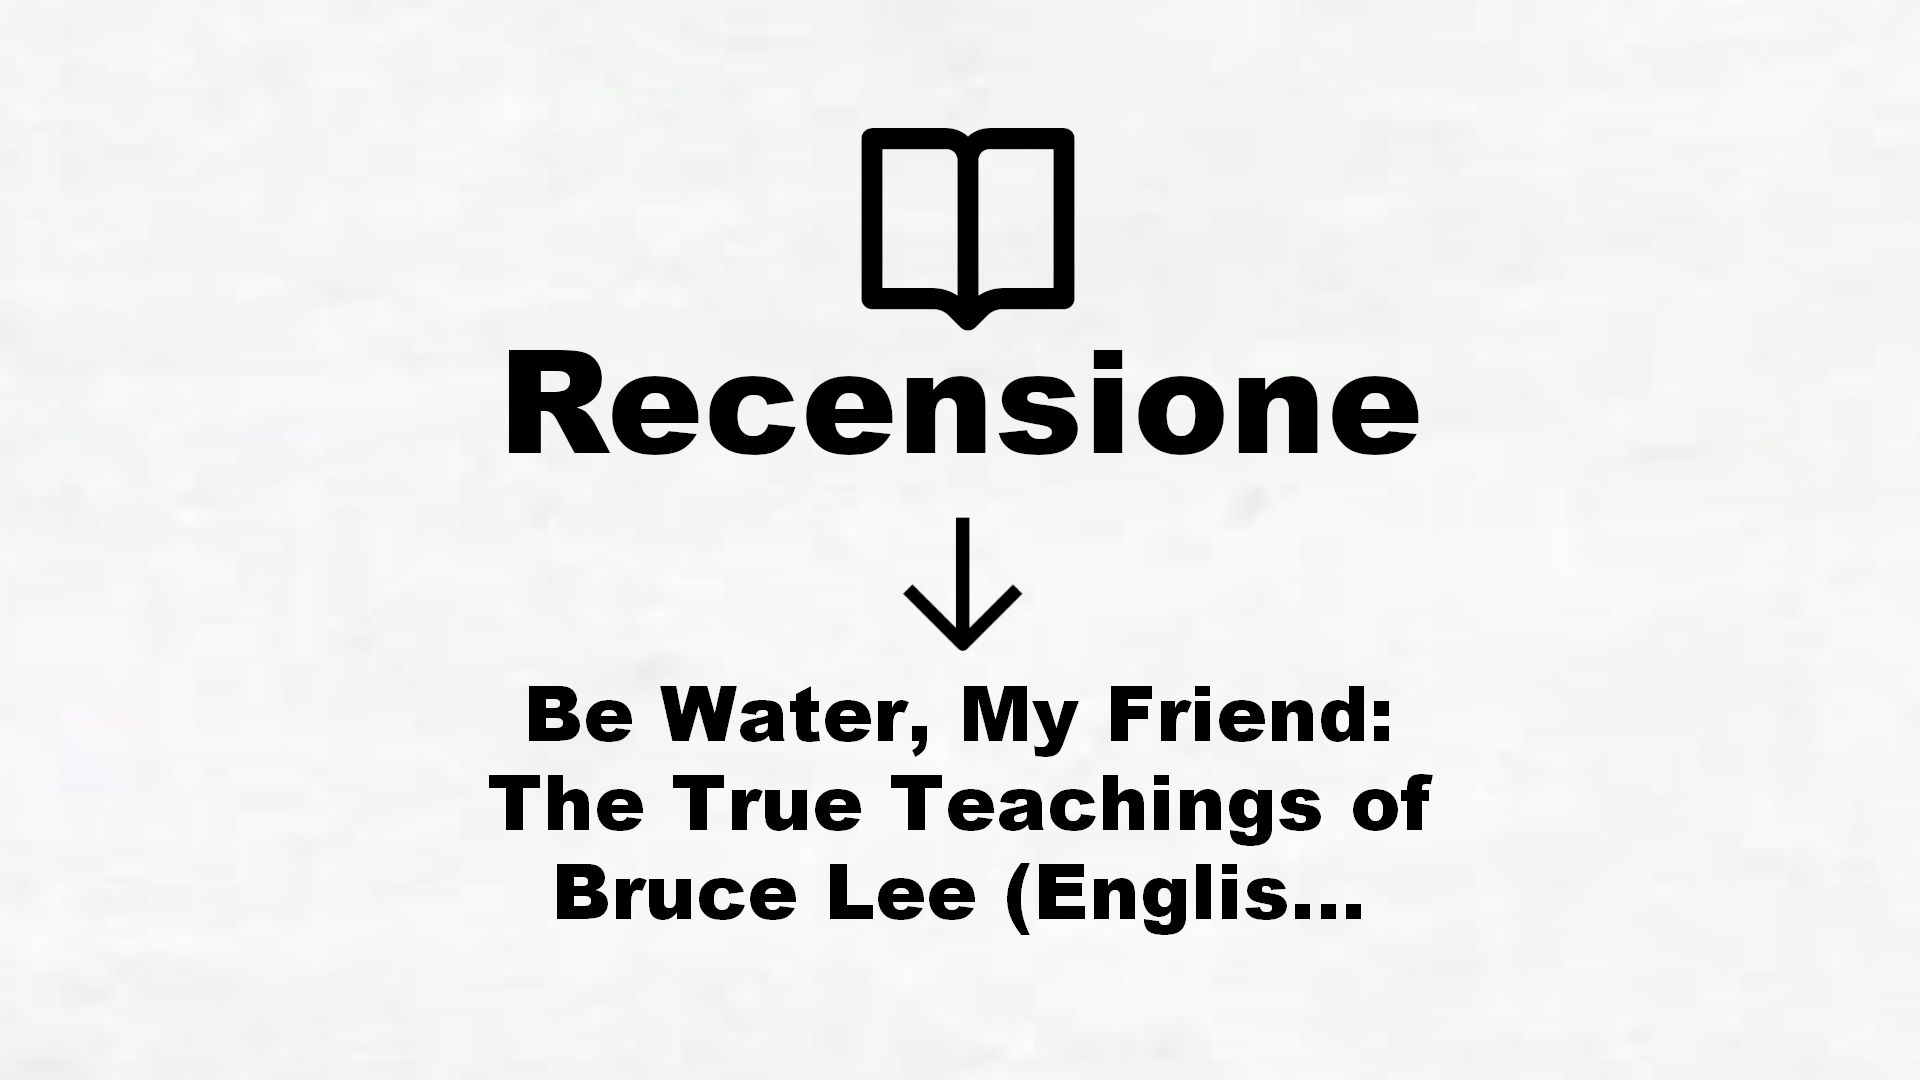 Be Water, My Friend: The True Teachings of Bruce Lee (English Edition) – Recensione Libro